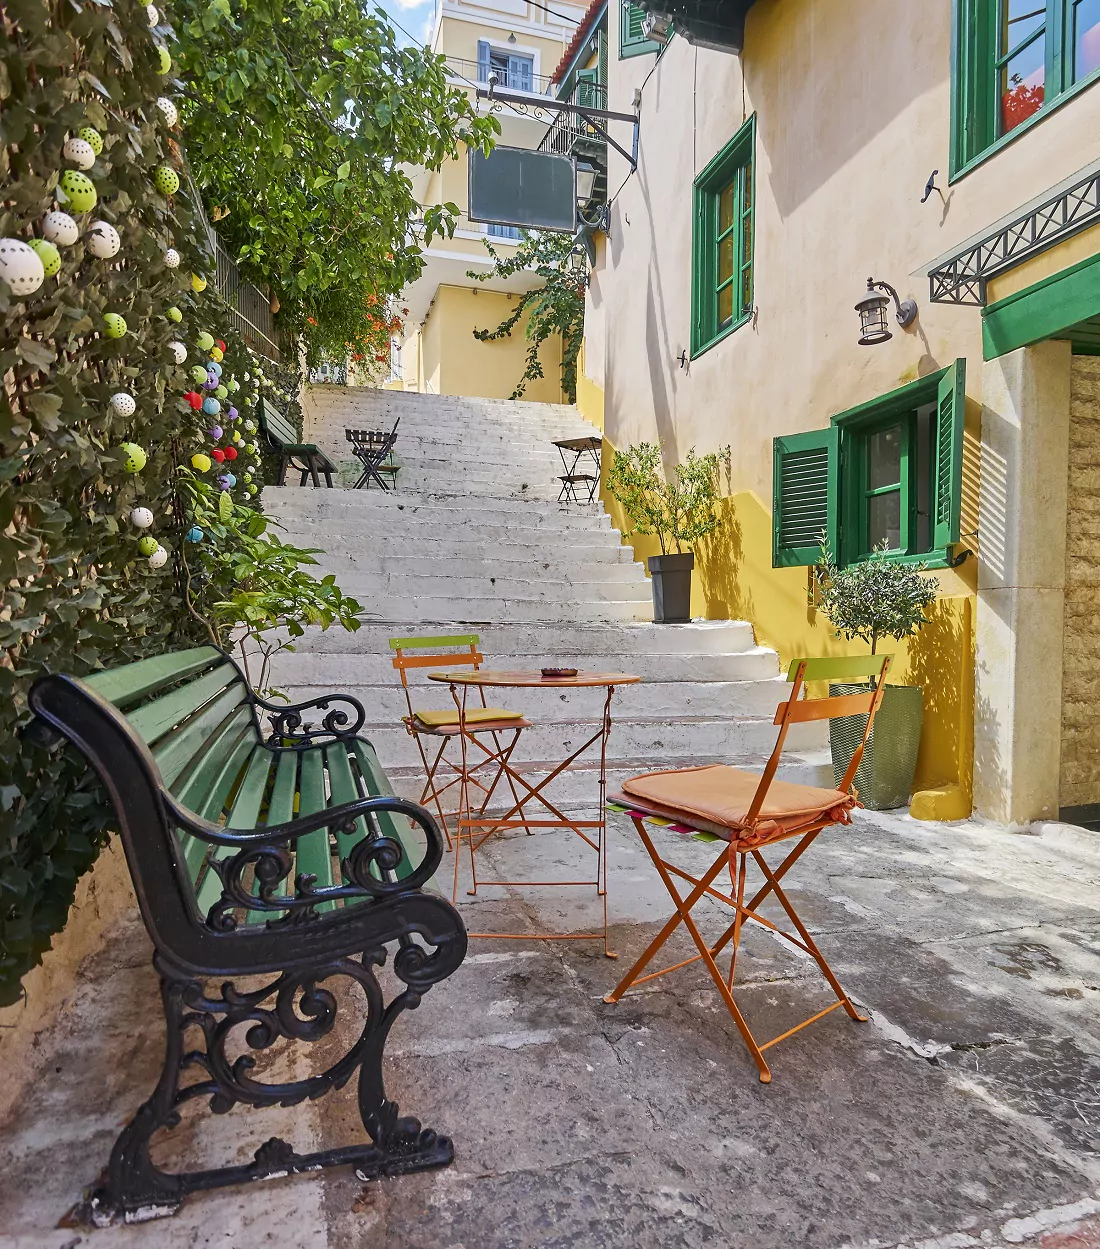 Stroll through the picturesque alleys of Hydra